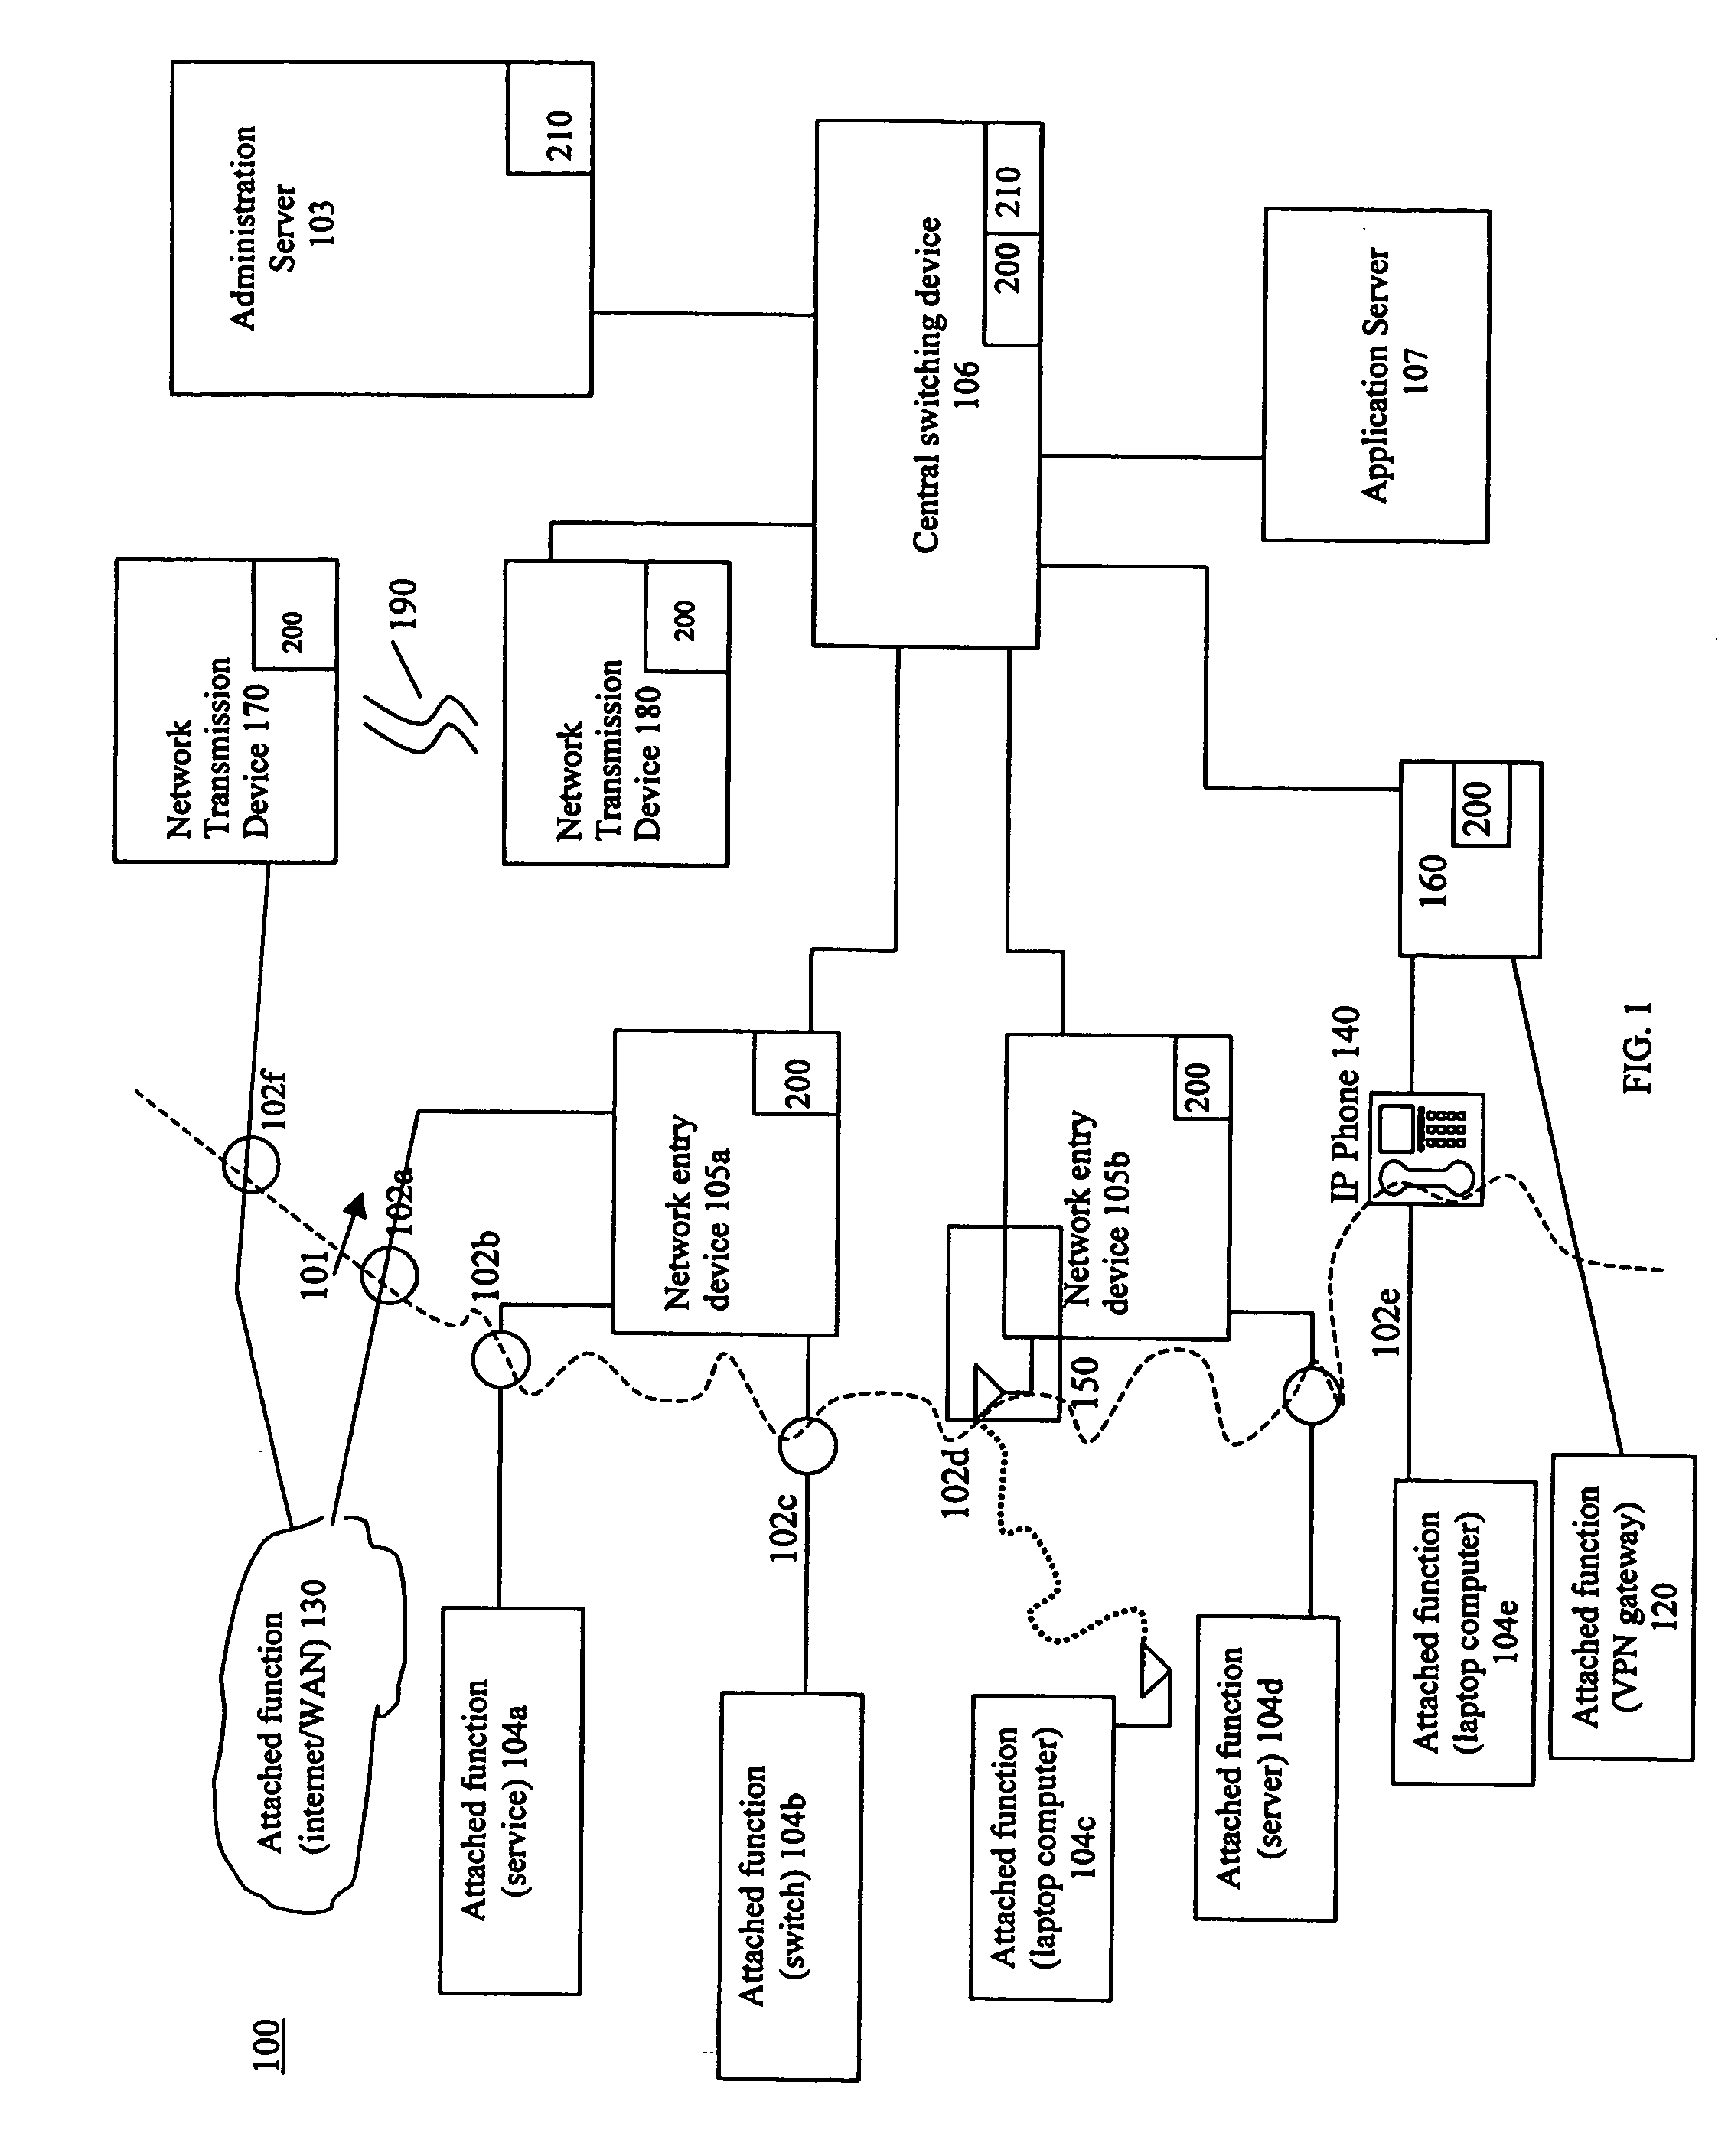 Encryption security in a network system